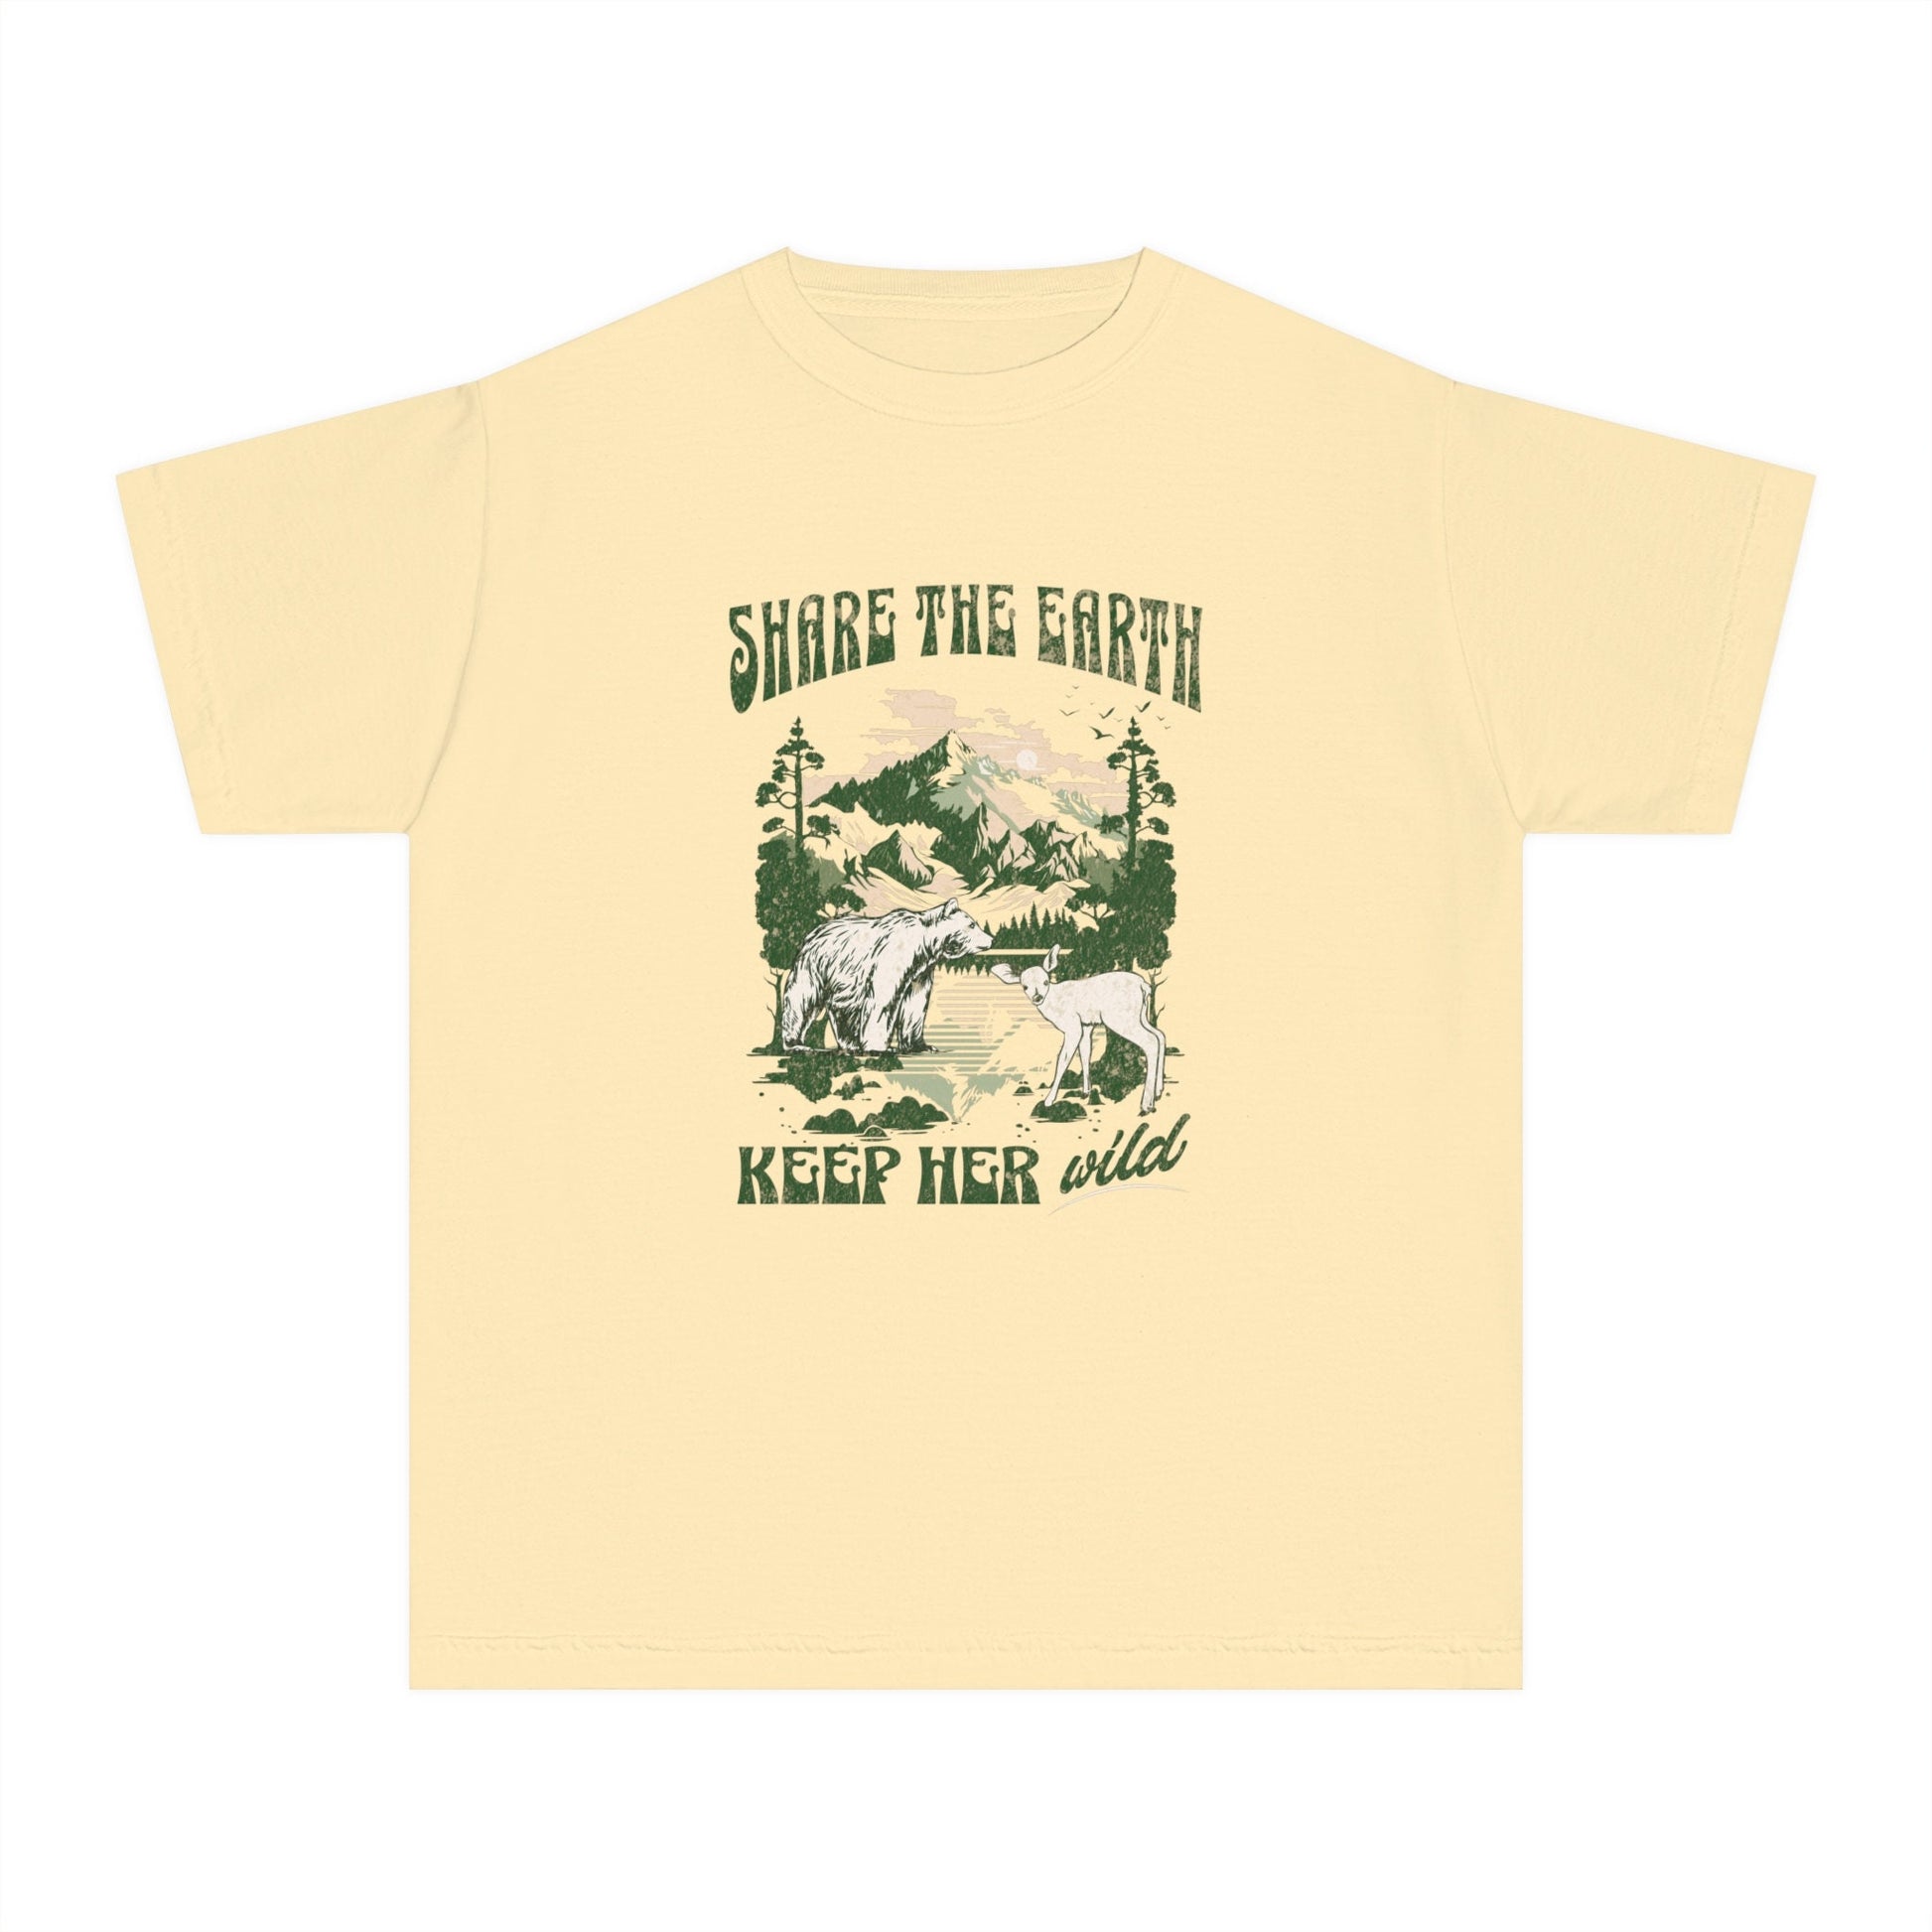 Share The Earth Shirt Kids Comfort Colors Graphic Tee Nature Shirt Granola Aesthetic Mountains Shirt Forest Animal Lover TShirt Colorado Tee